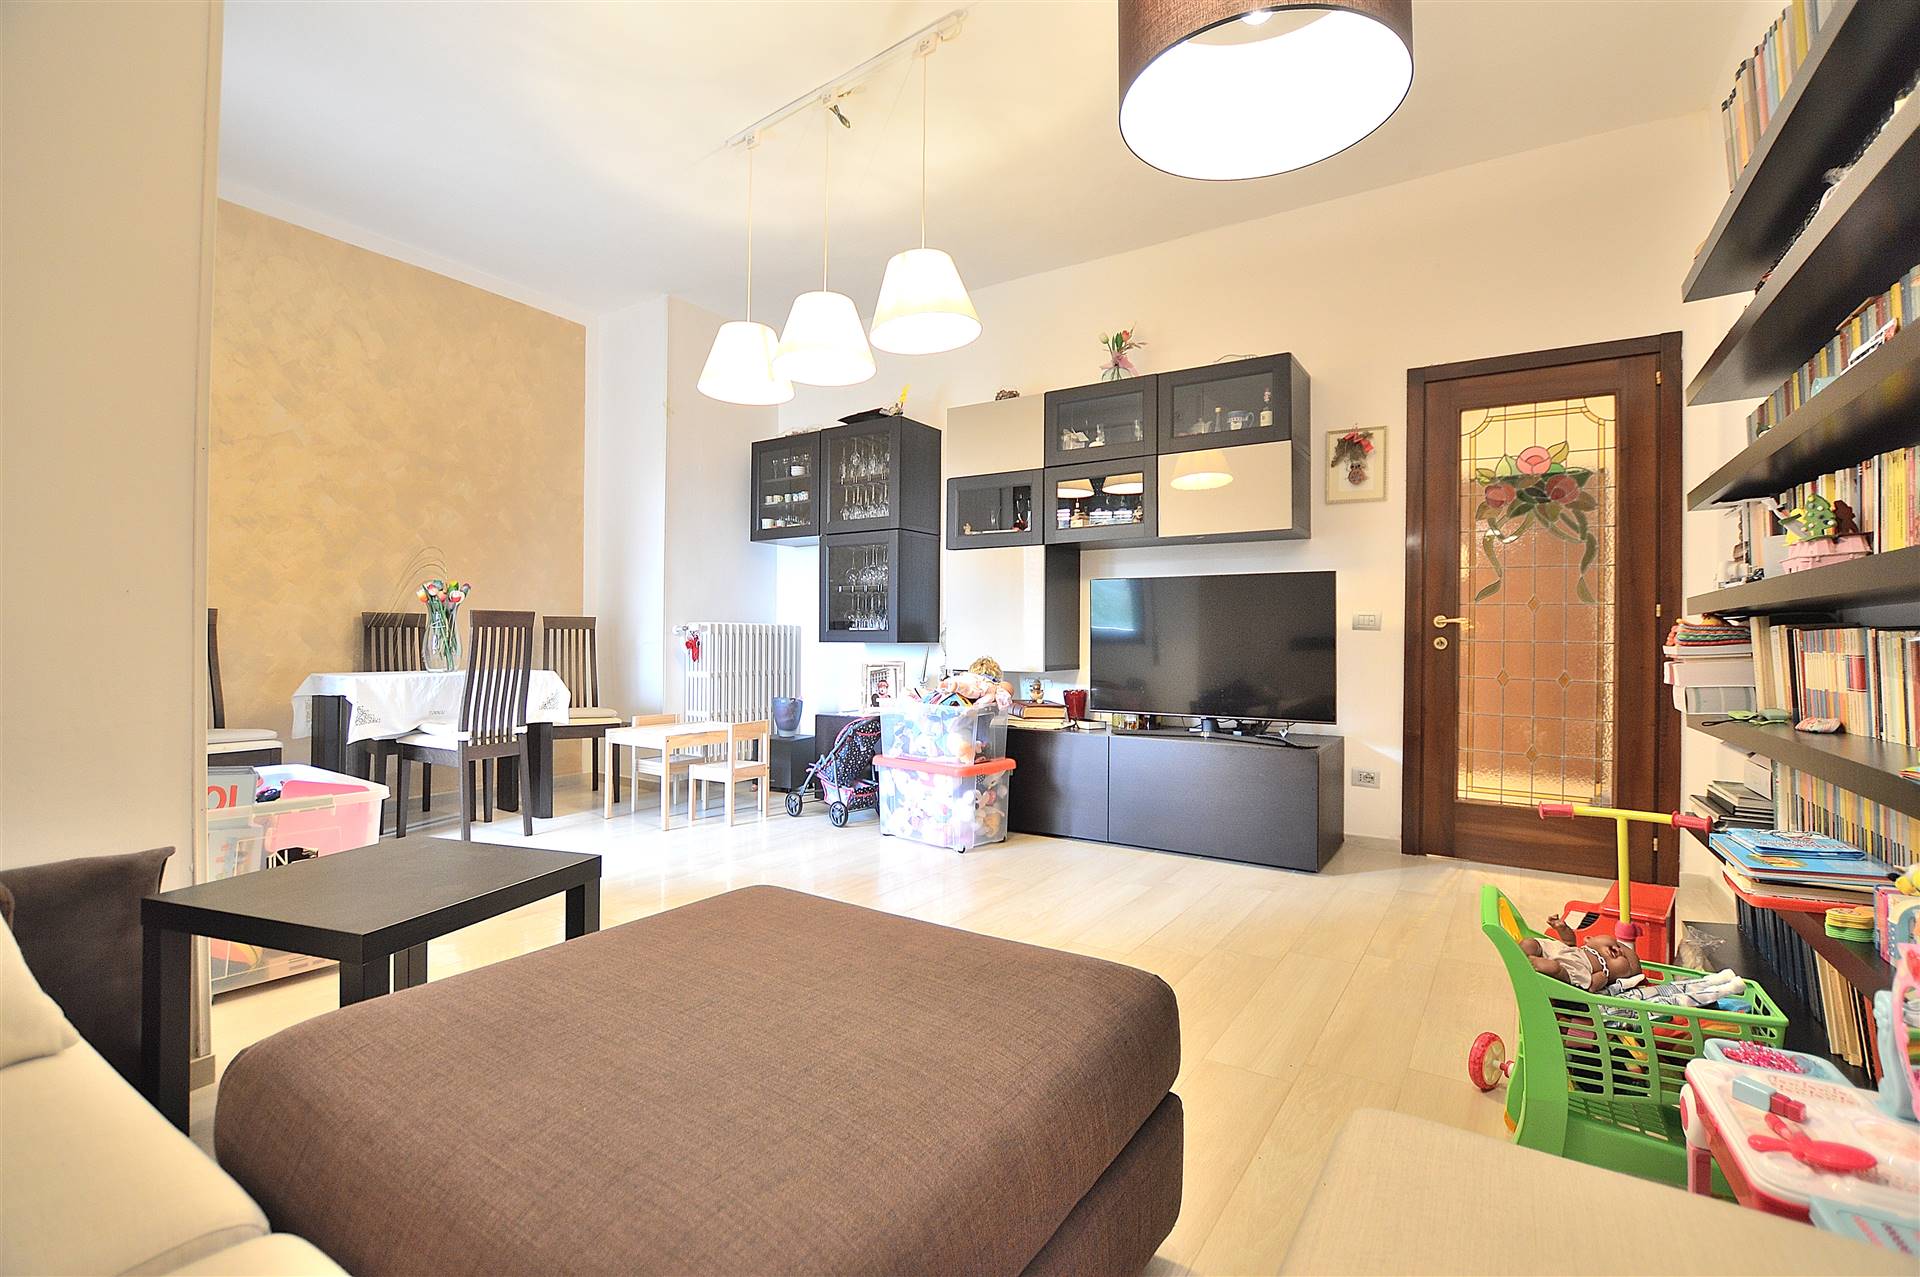 FUORI PORTA CAMOLLIA, SIENA, Apartment for sale of 95 Sq. mt., Excellent Condition, Heating Individual heating system, Energetic class: G, Epi: 175 